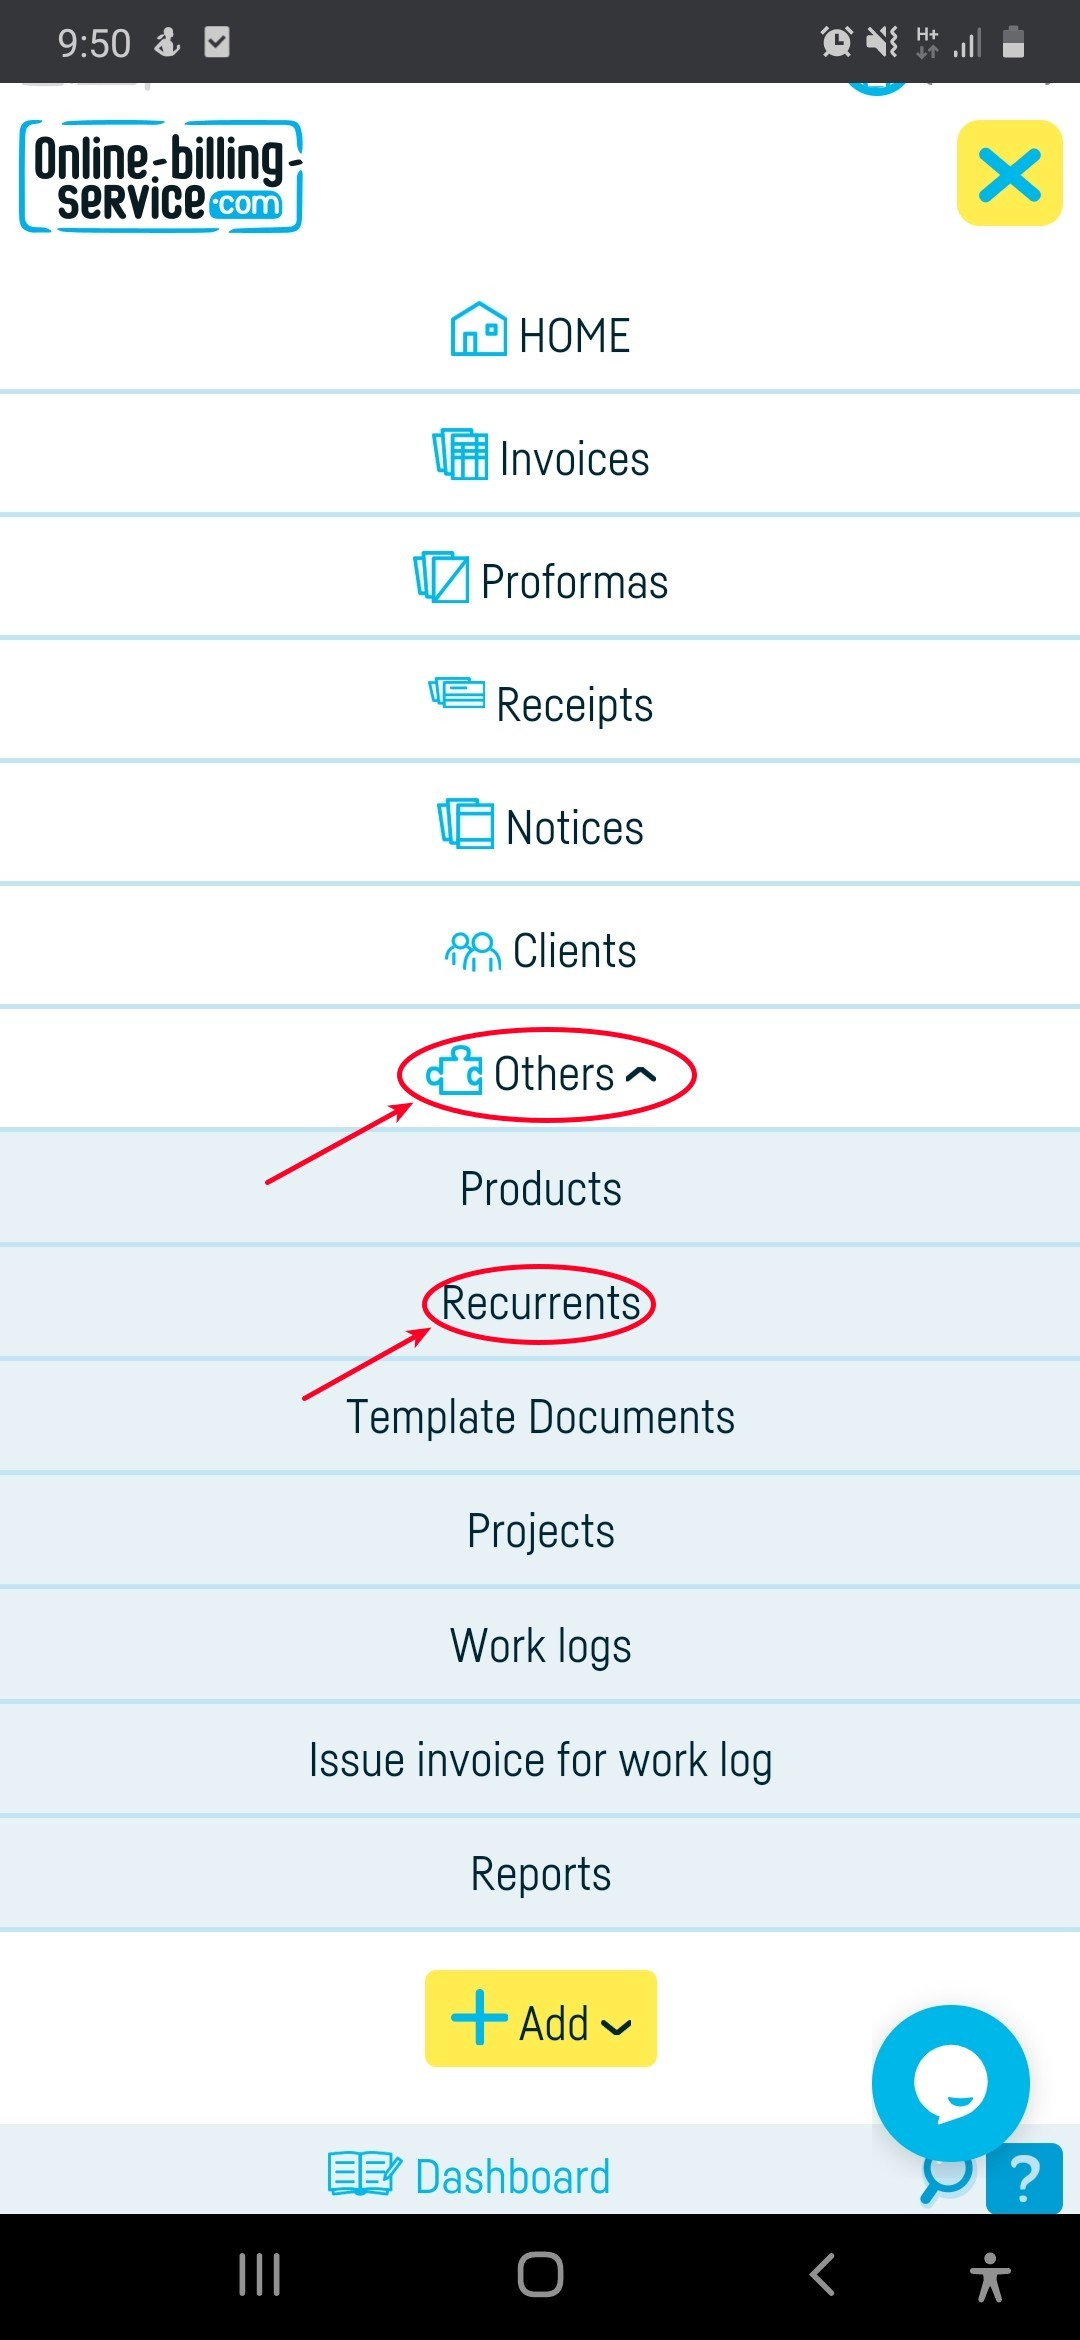 How do I define an invoice for a recurrent? - step 1